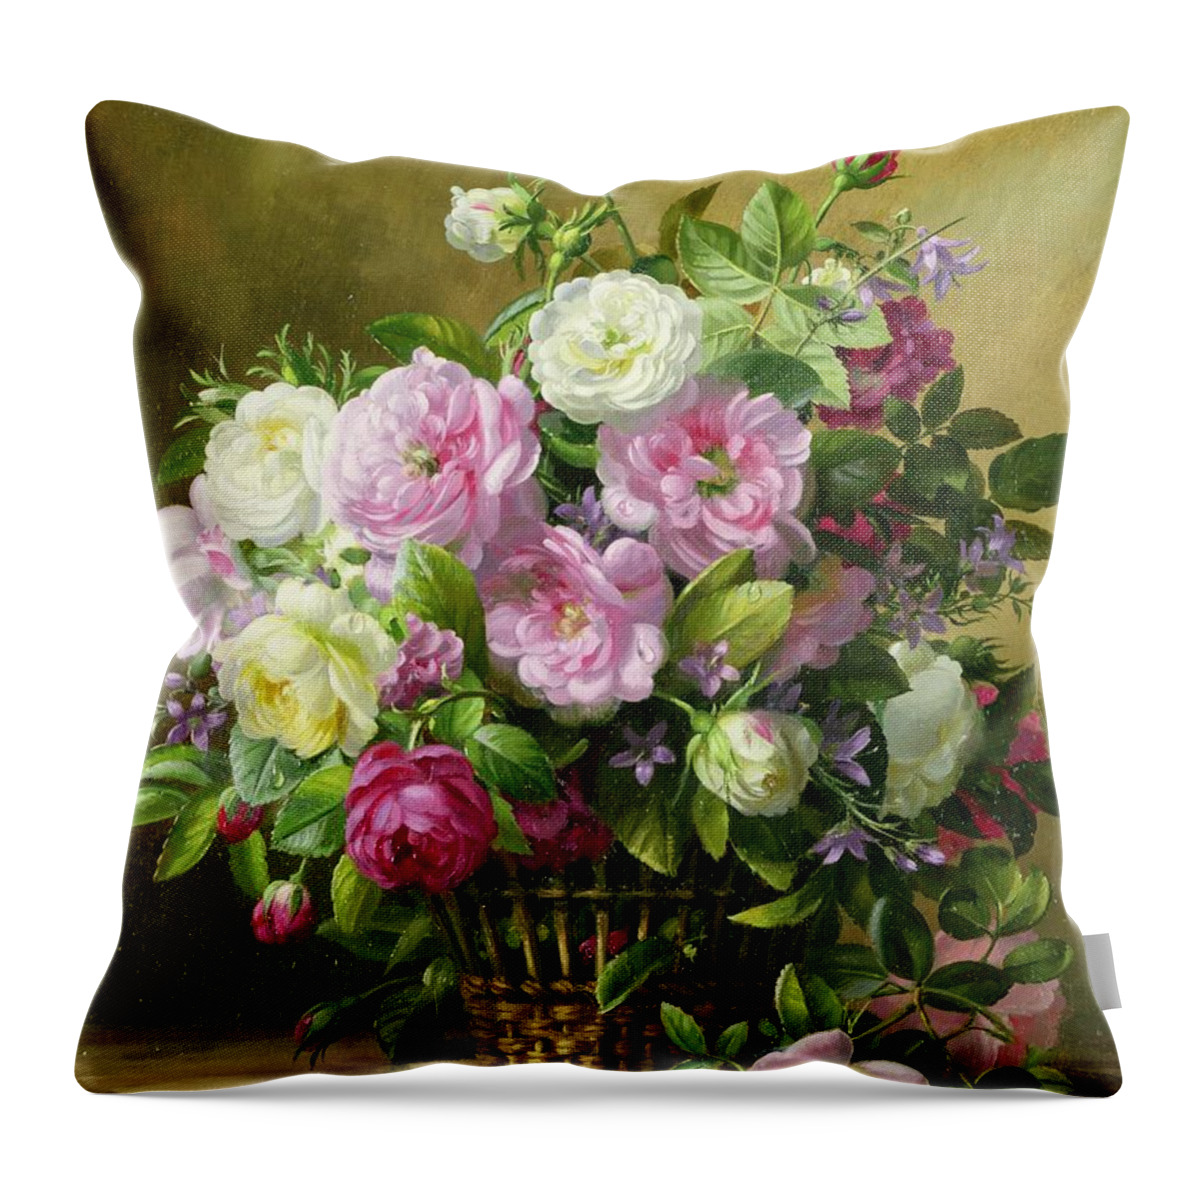 Rose; Roses; Still Life; Flower; Flowers; Arrangement; Pink; White; Basket; Leafs; Rose Petals On Floor; Pink Rose On Floor Throw Pillow featuring the painting Roses by Albert Williams